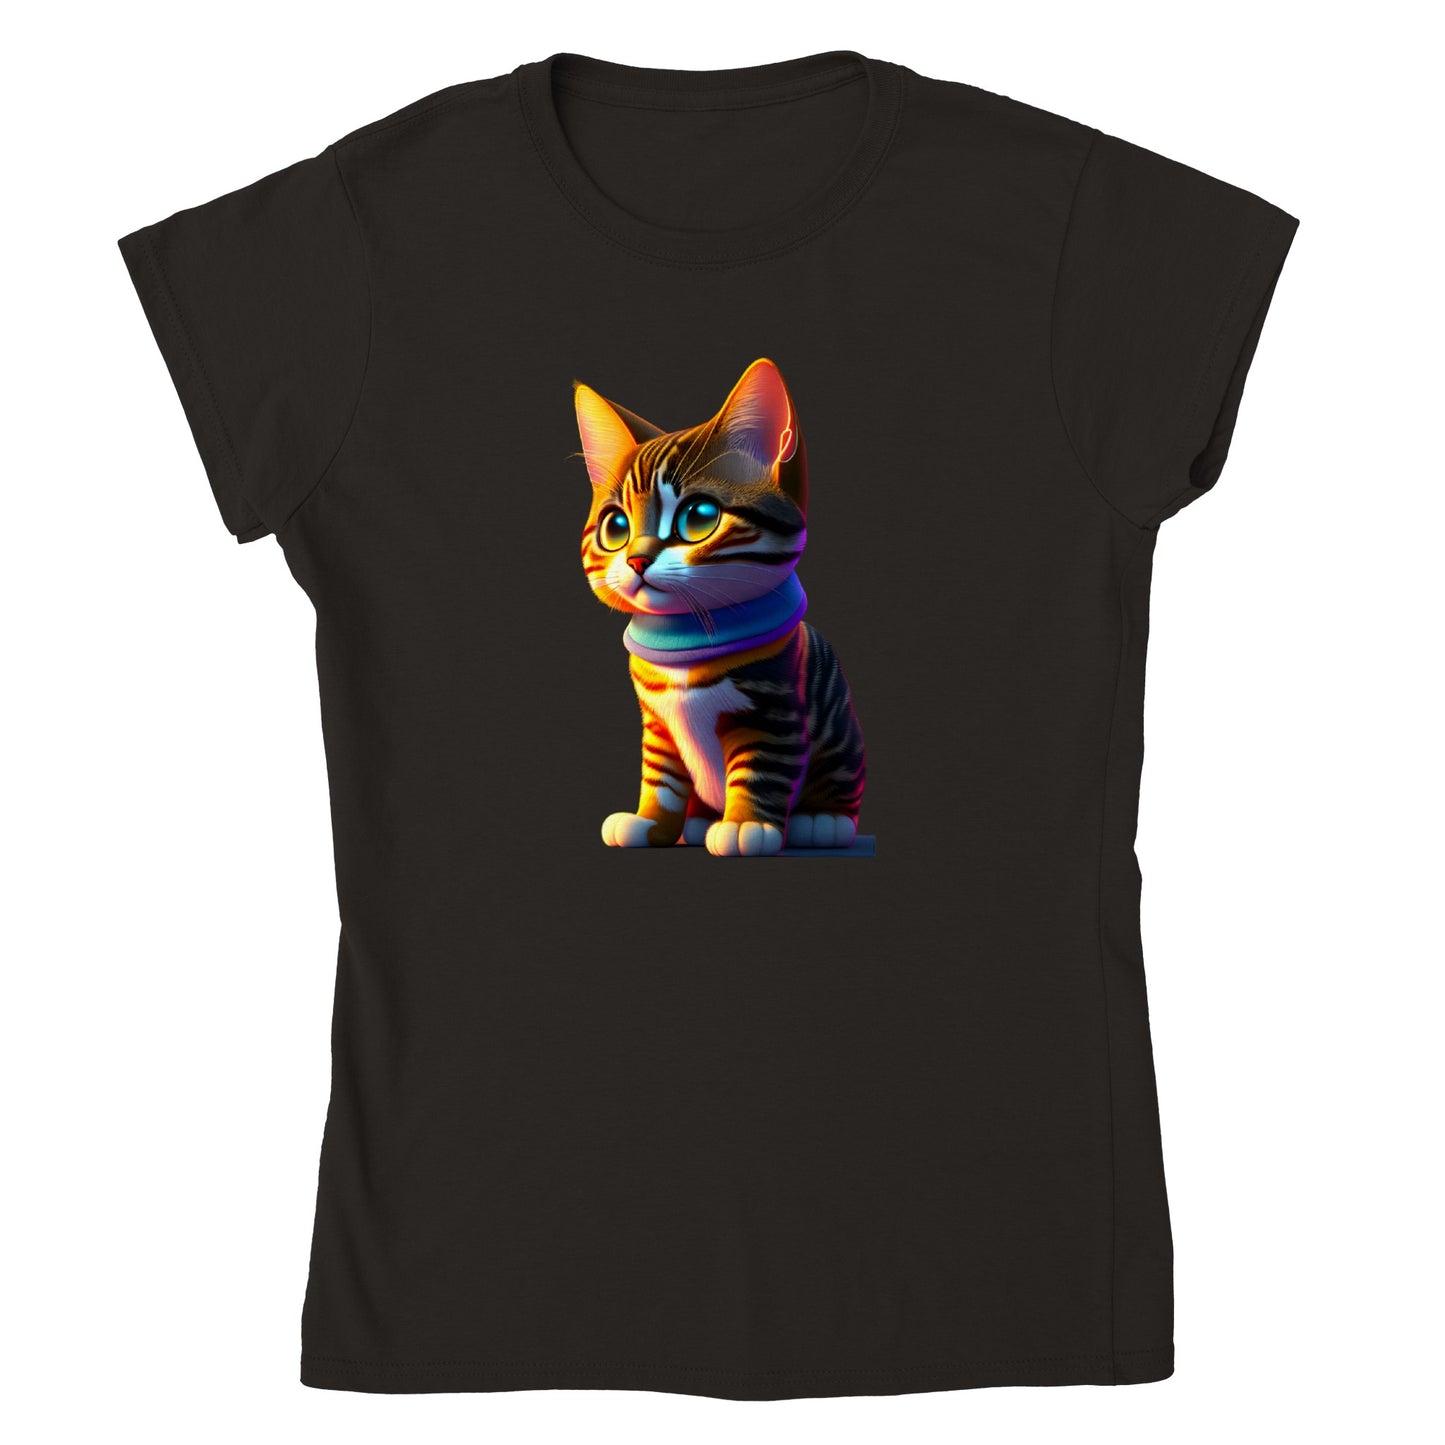 Adorable, Cool, Cute Cats and Kittens Toy - Classic Women’s Crewneck T-Shirt 32